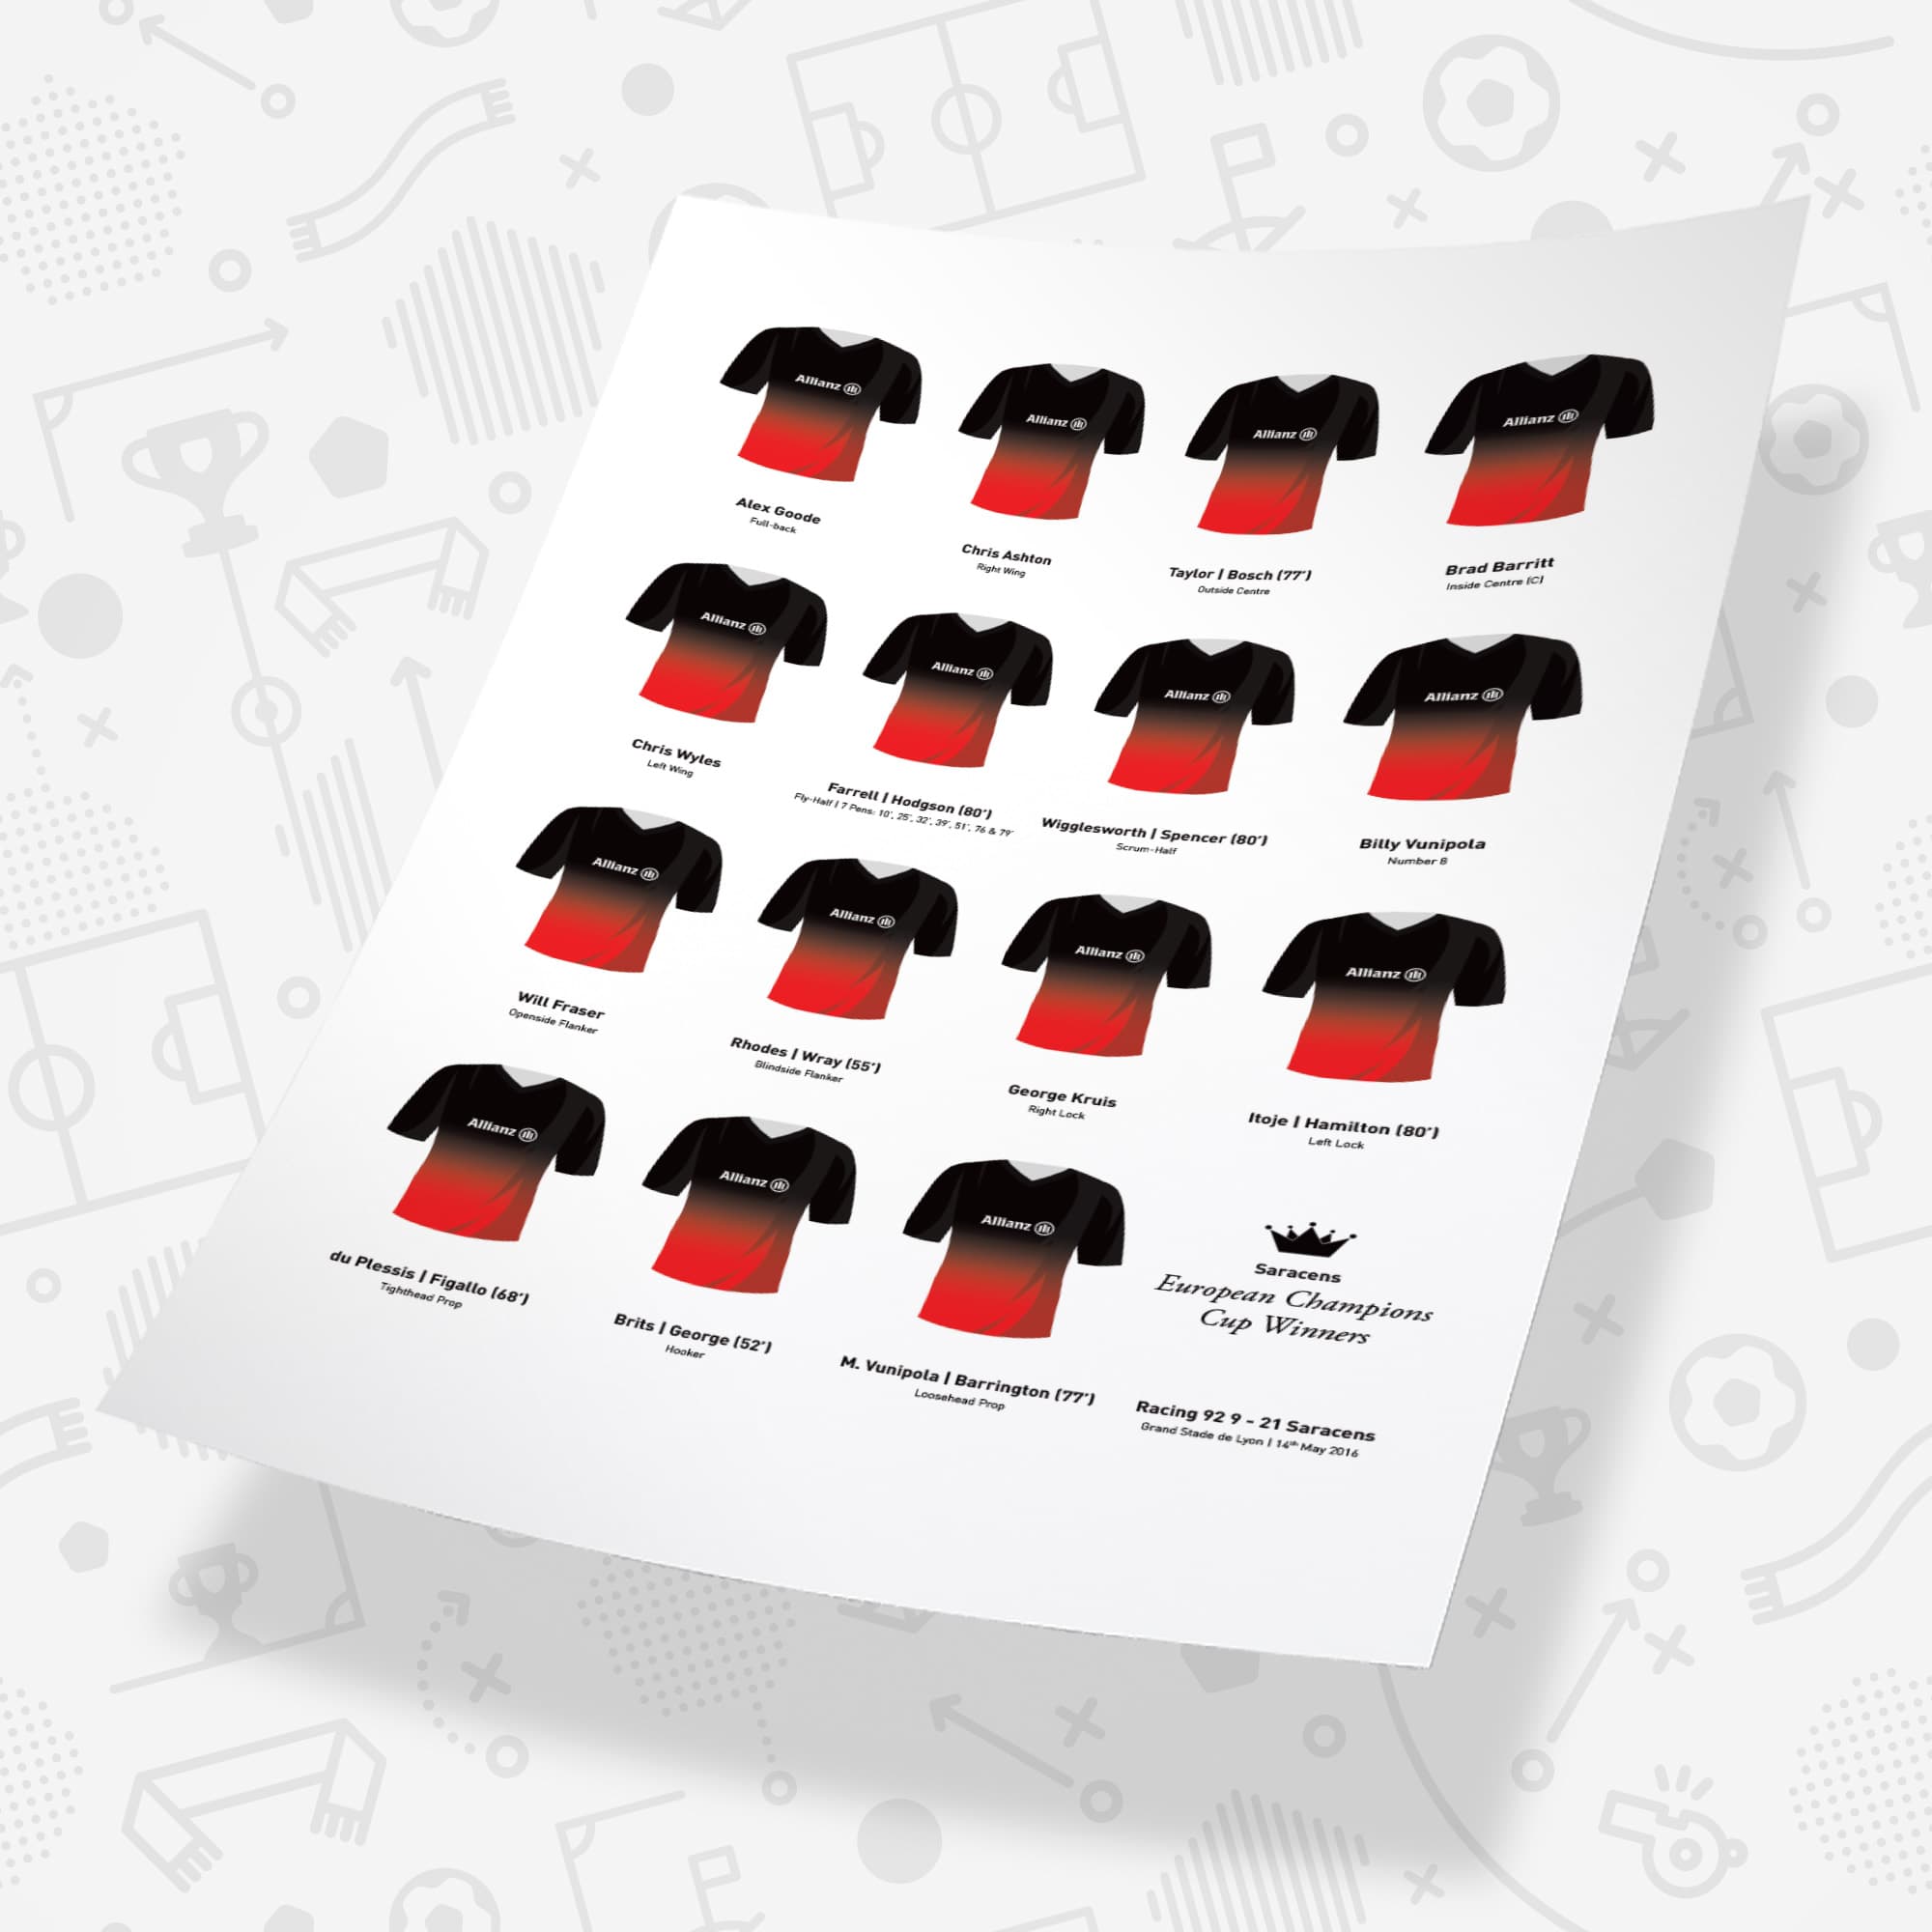 Saracens Rugby Union 2016 European Champions Cup Winners Team Print